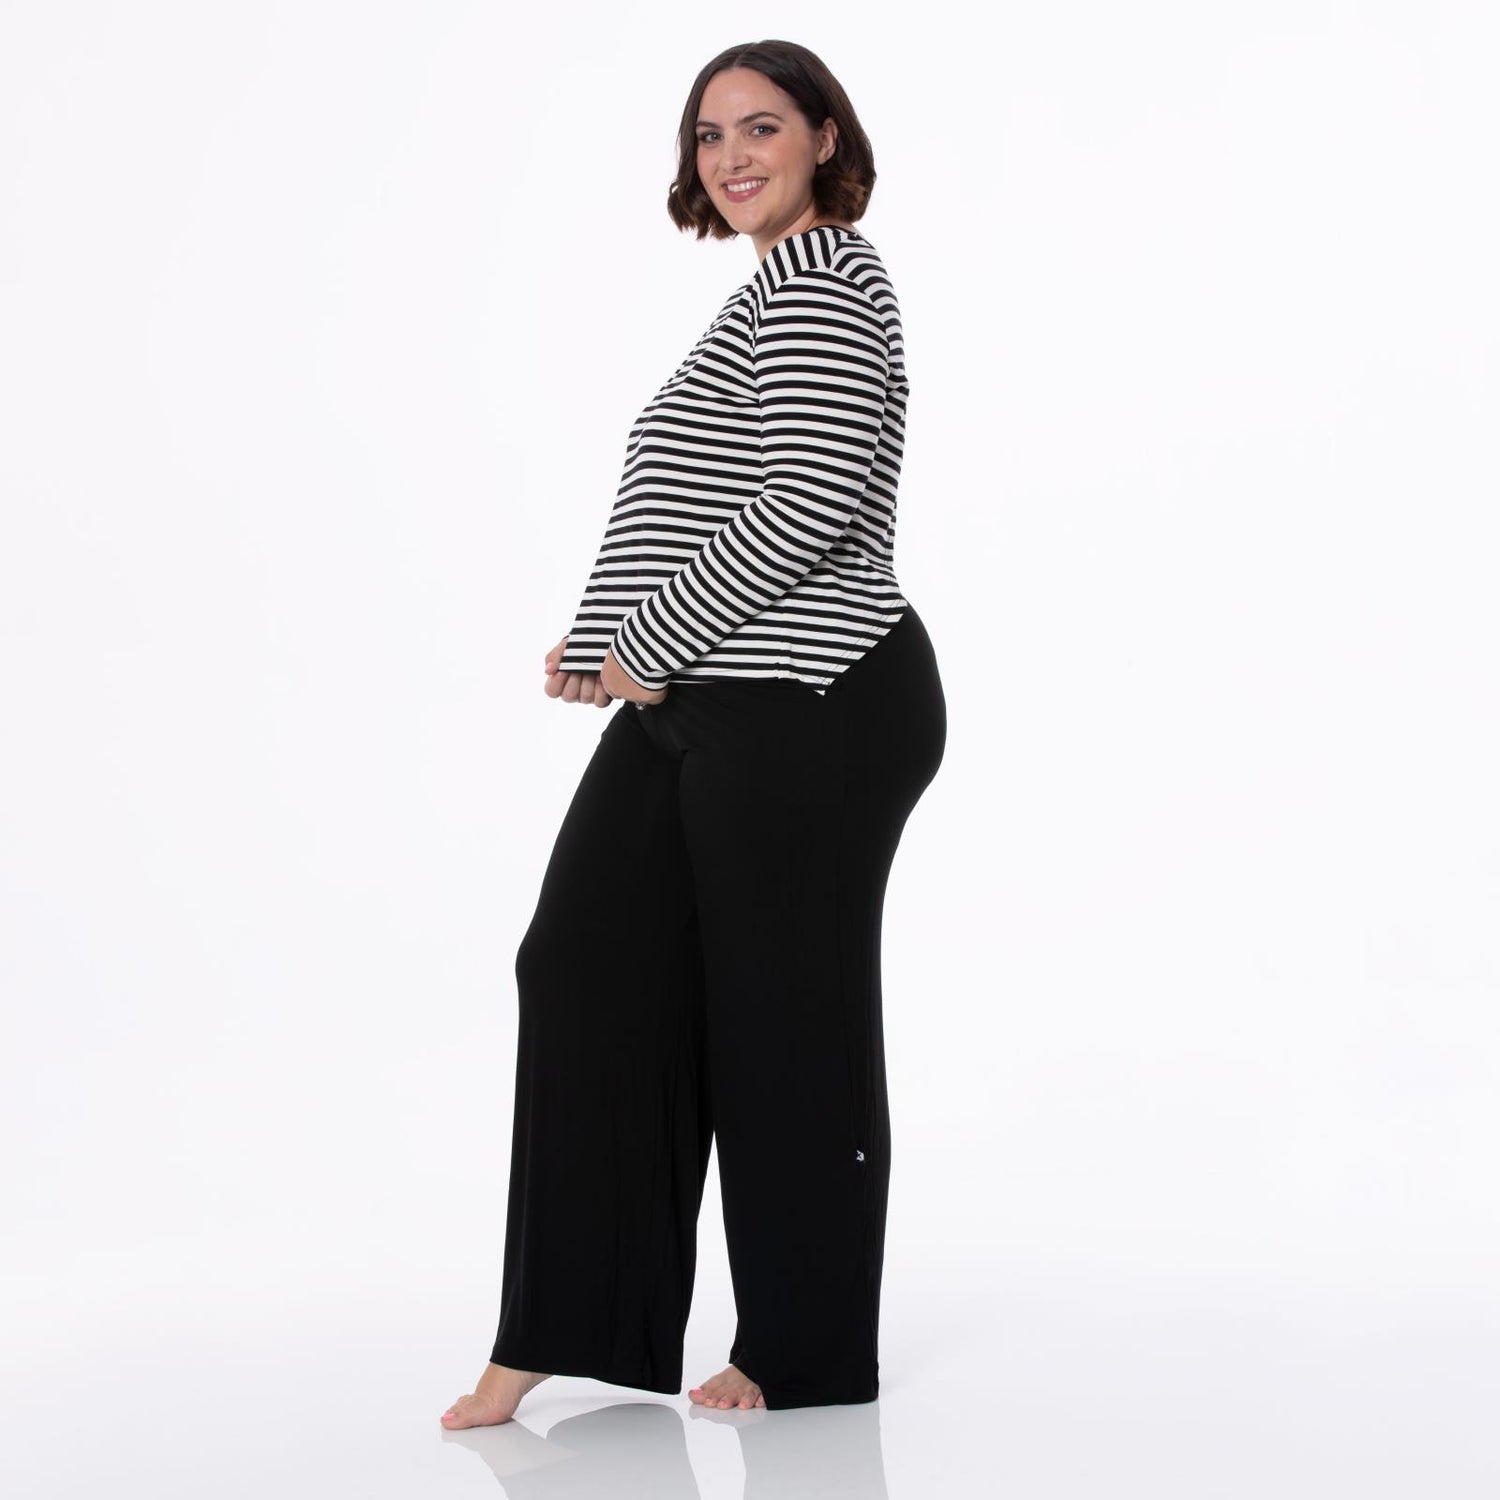 Women's Solid Lounge Pants in Midnight